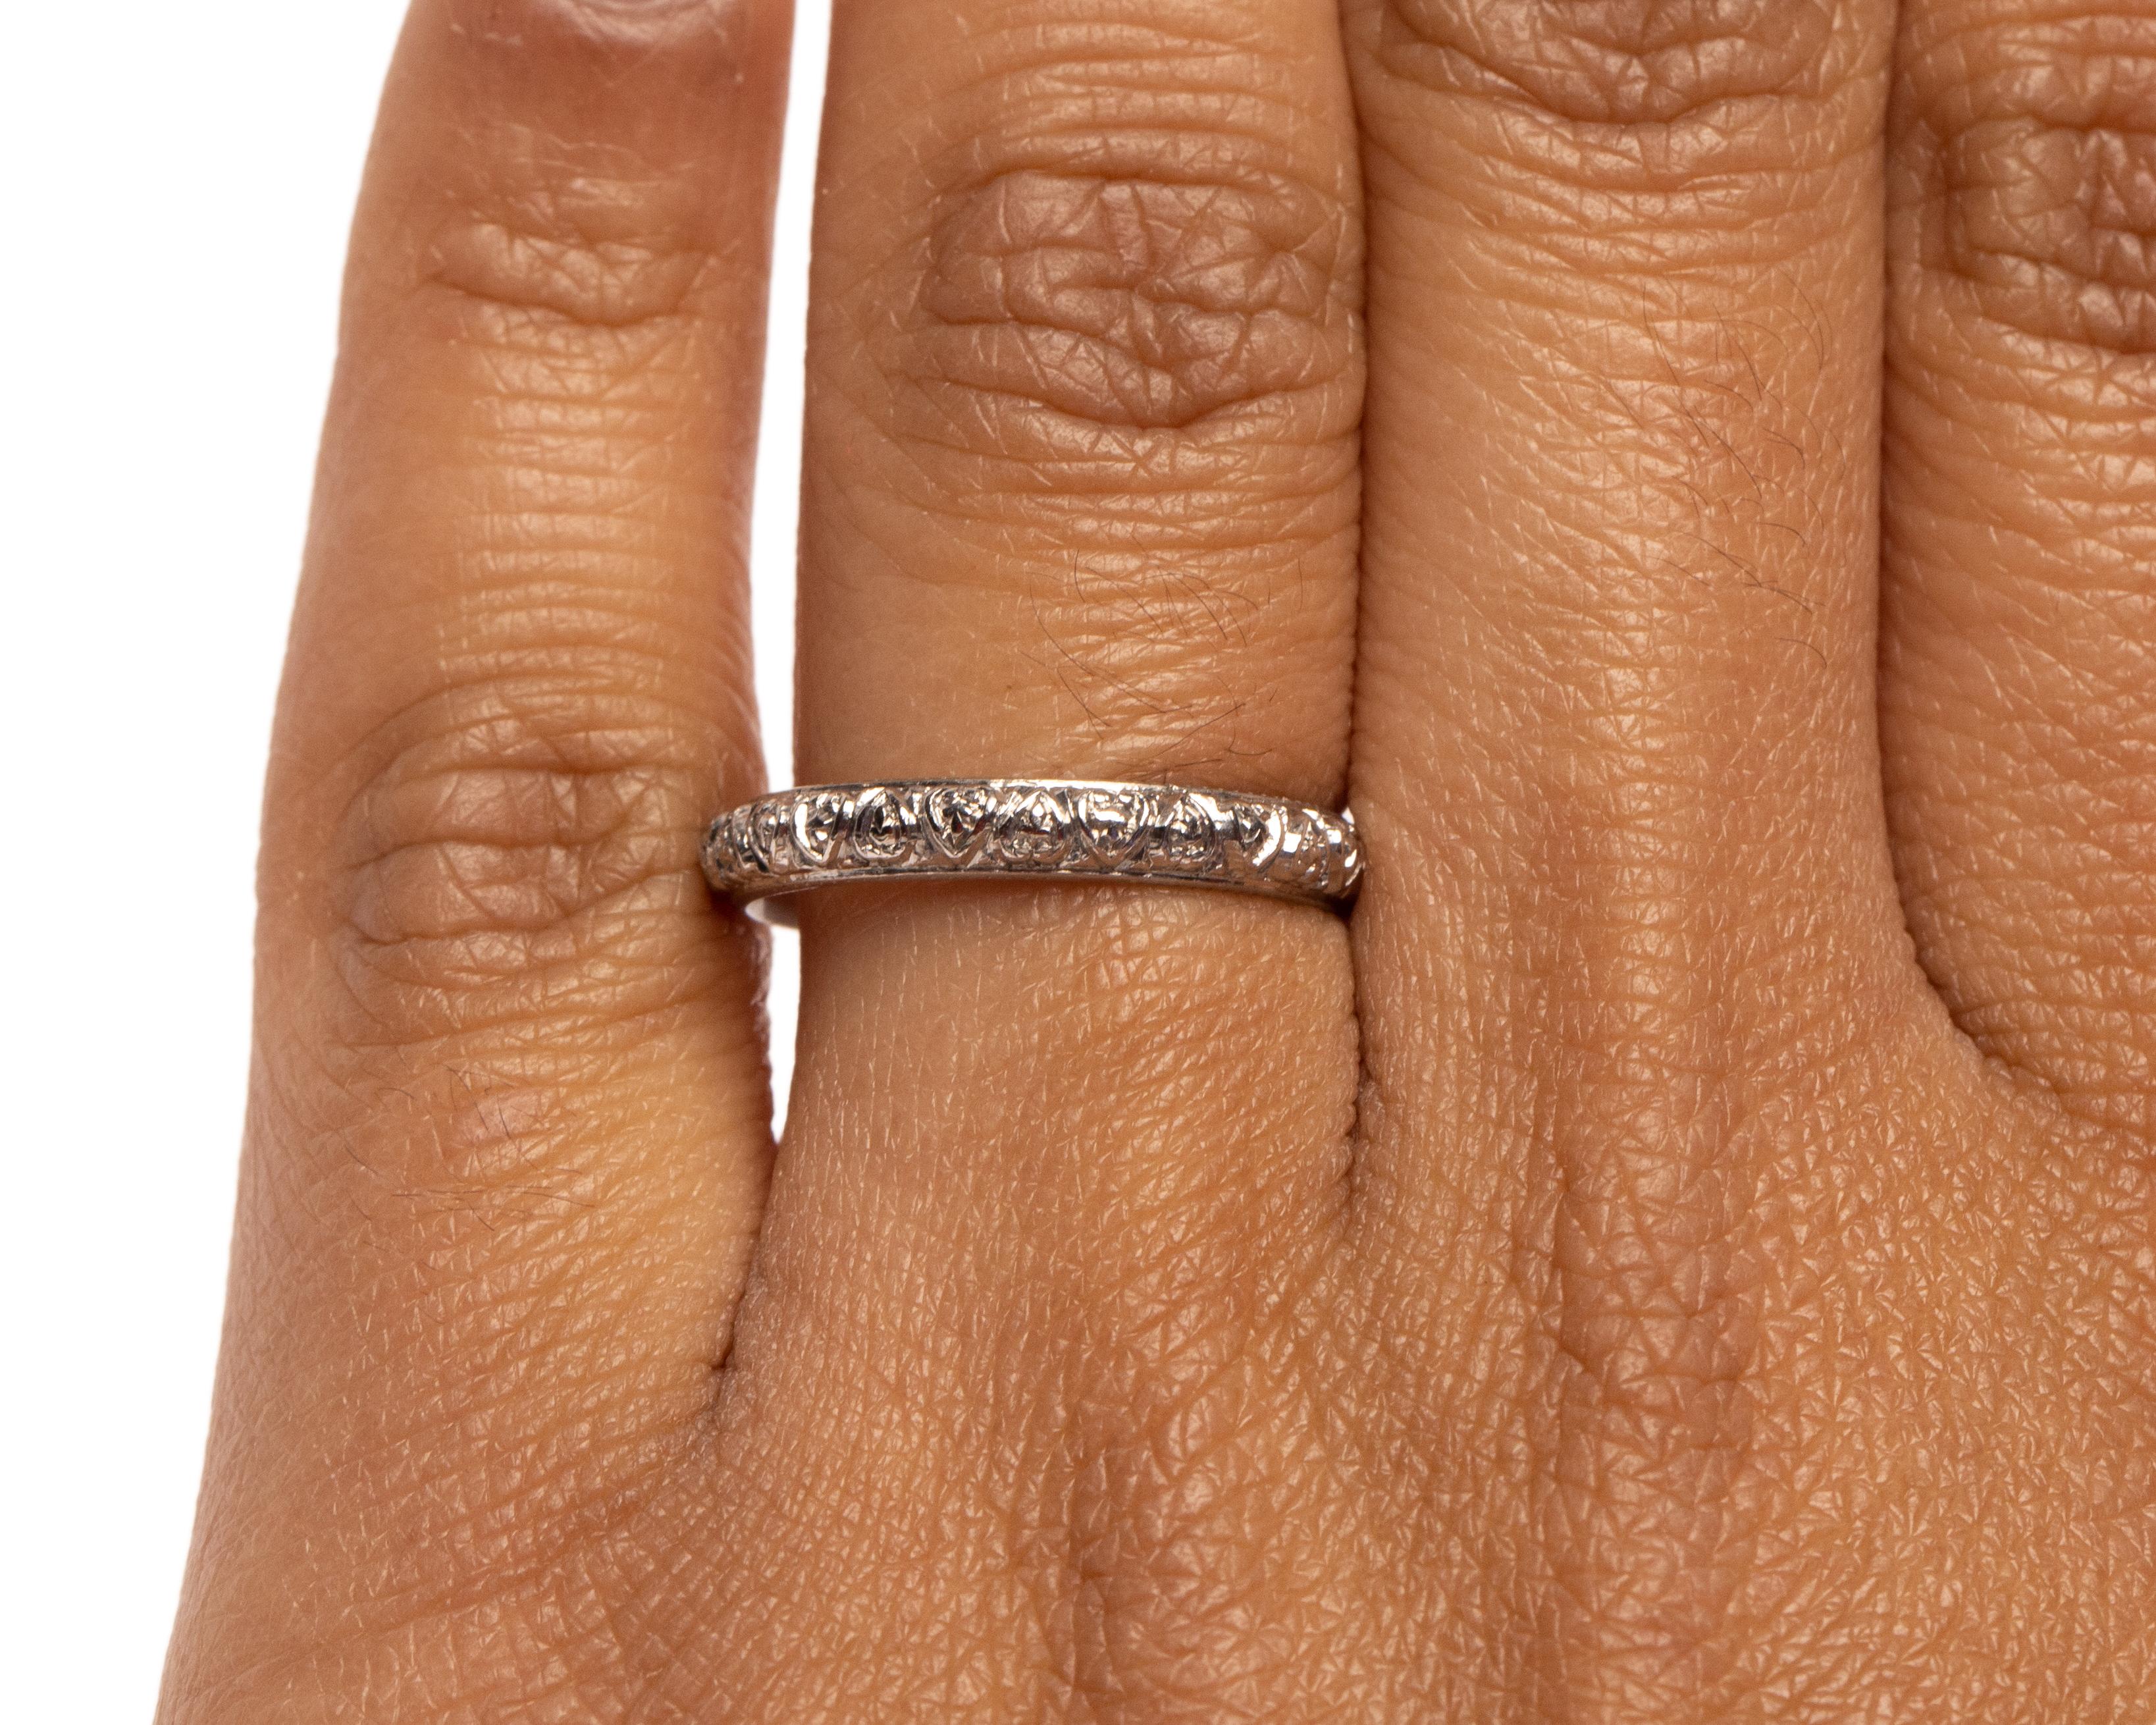 This band we have here is a perfect example of the Edwardian style, and for its age it is in beautiful condition. Crafted in platinum this band features an heart shape design repeating all of the way around the band. A thin line of milgrain frames